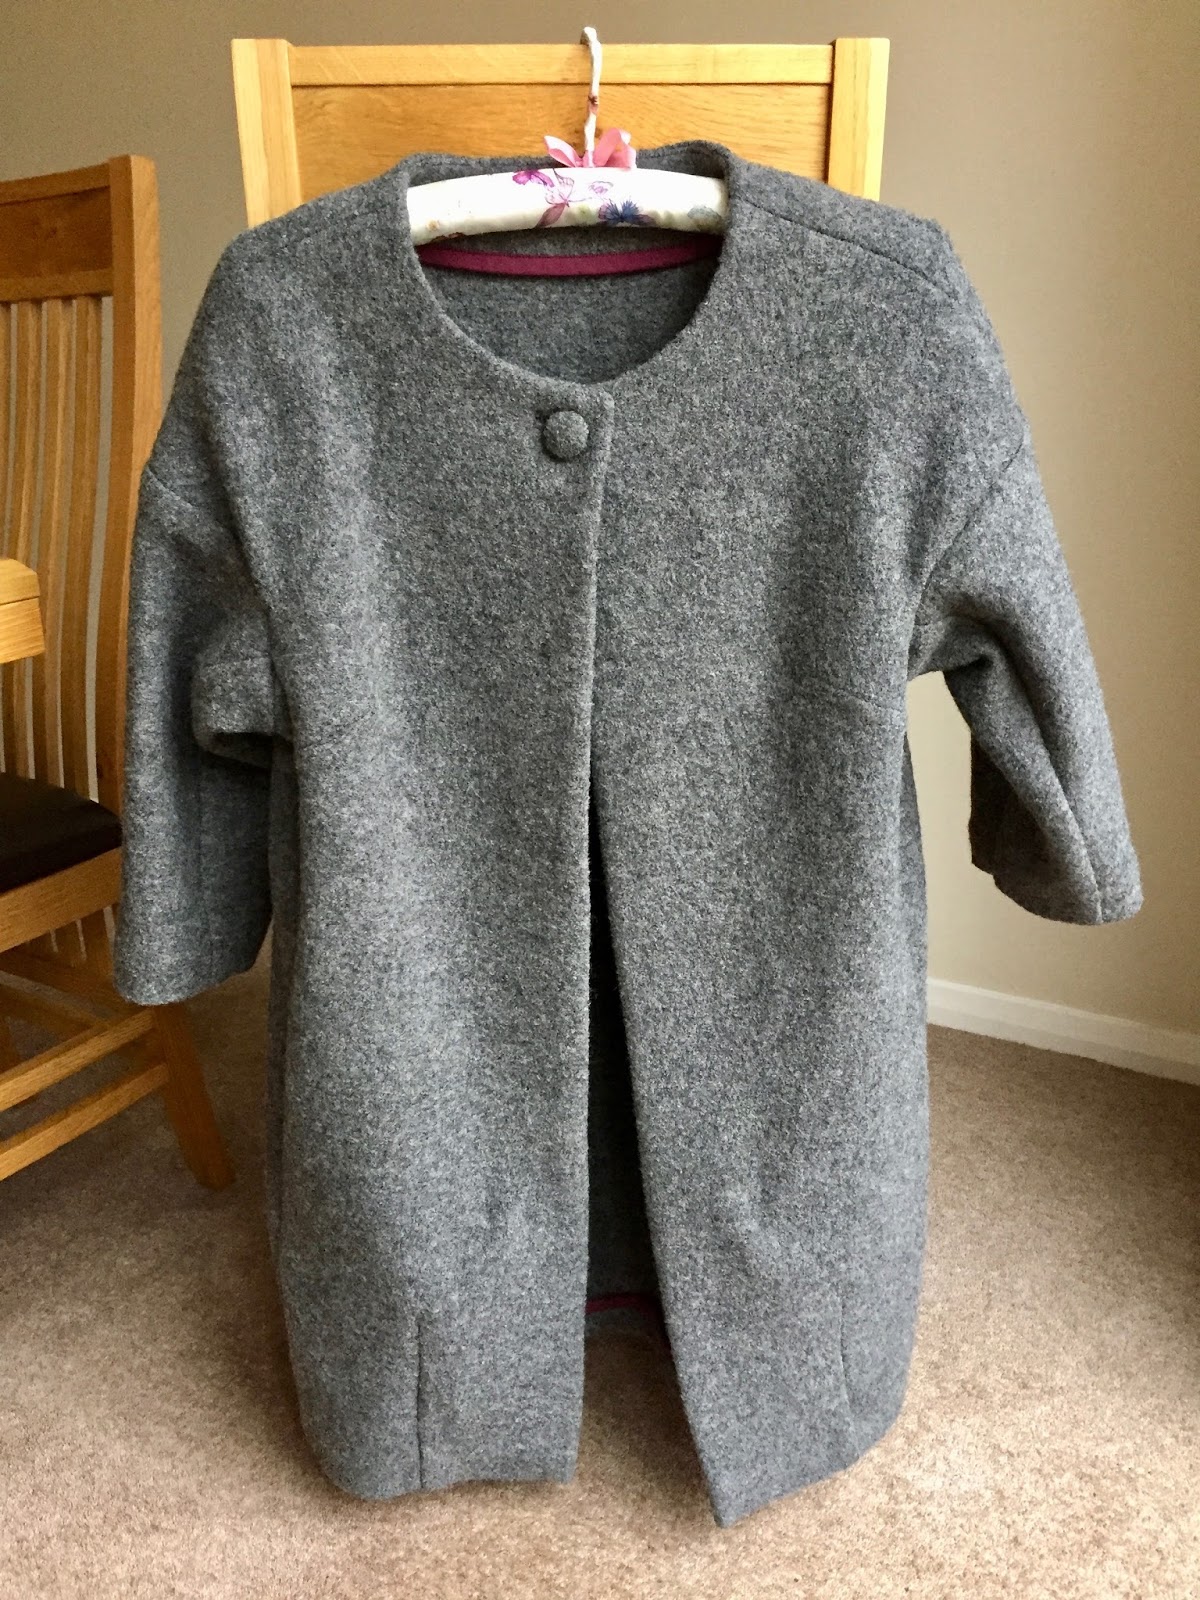 Boiled Wool Fabric Blog  Suggested Sewing Patterns